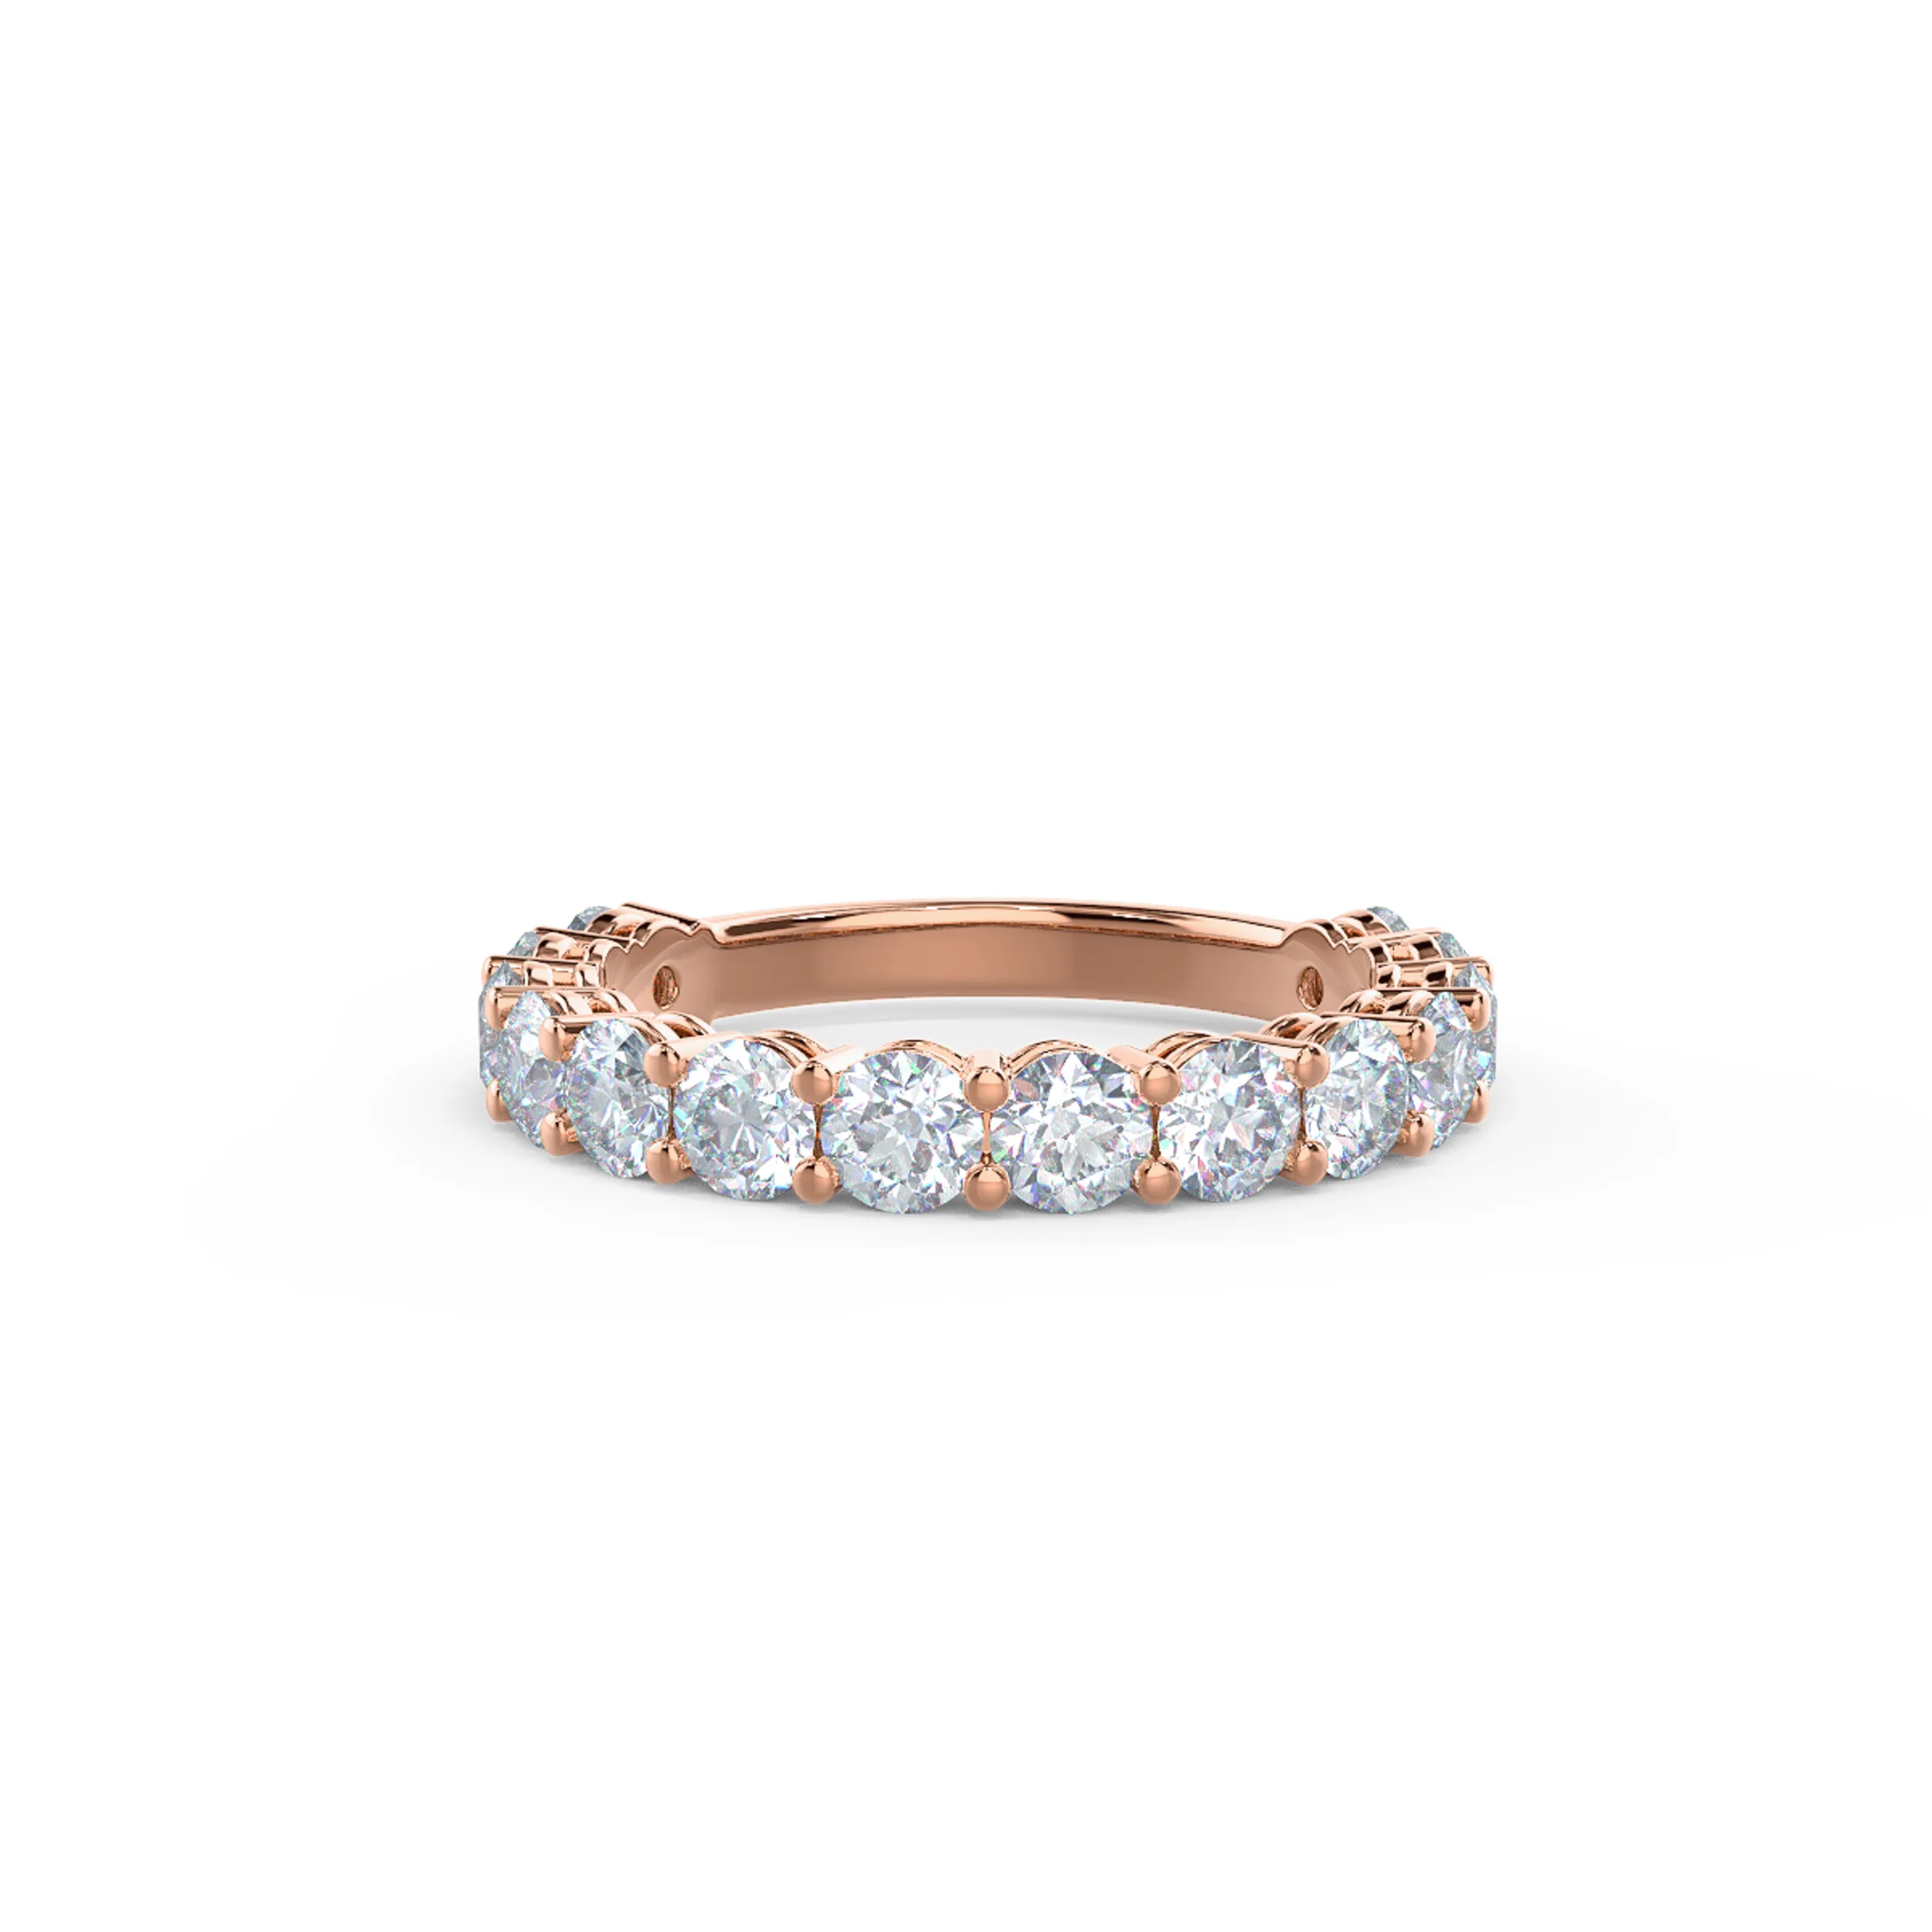 14k Rose Gold Prong Set Three Quarter Band featuring Hand Selected 2.0 Carat Round Brilliant Diamonds (Main View)